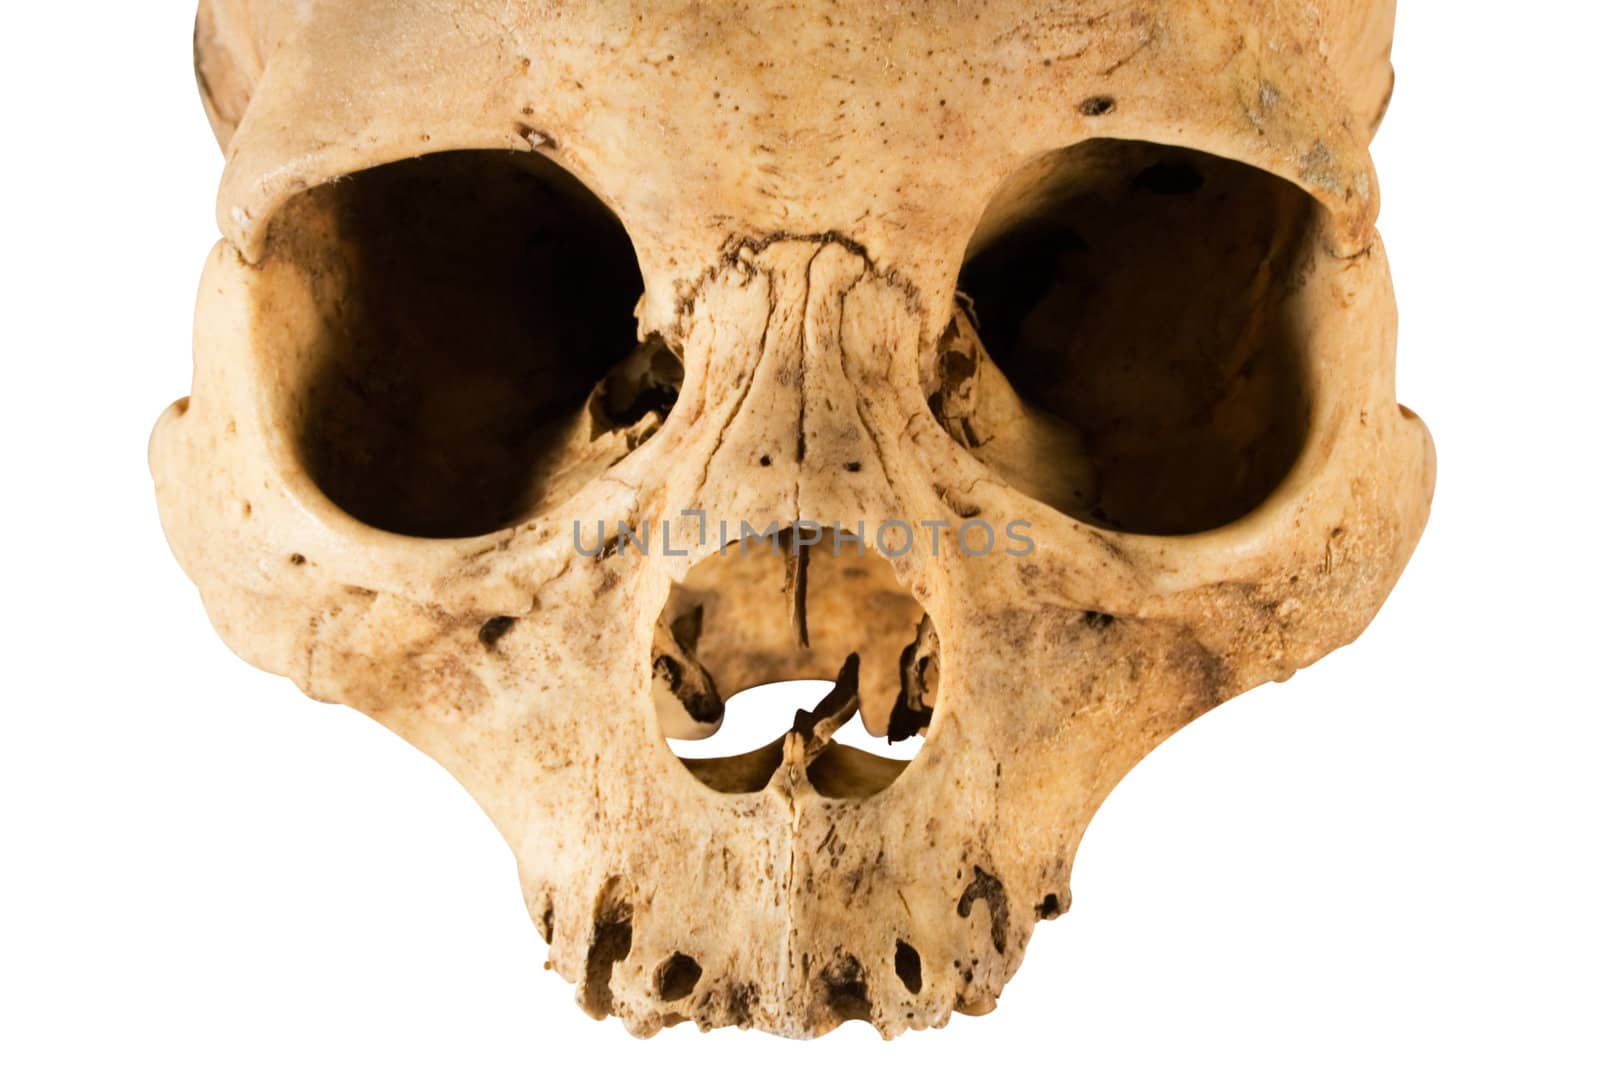 Skull with Clipping Path by winterling